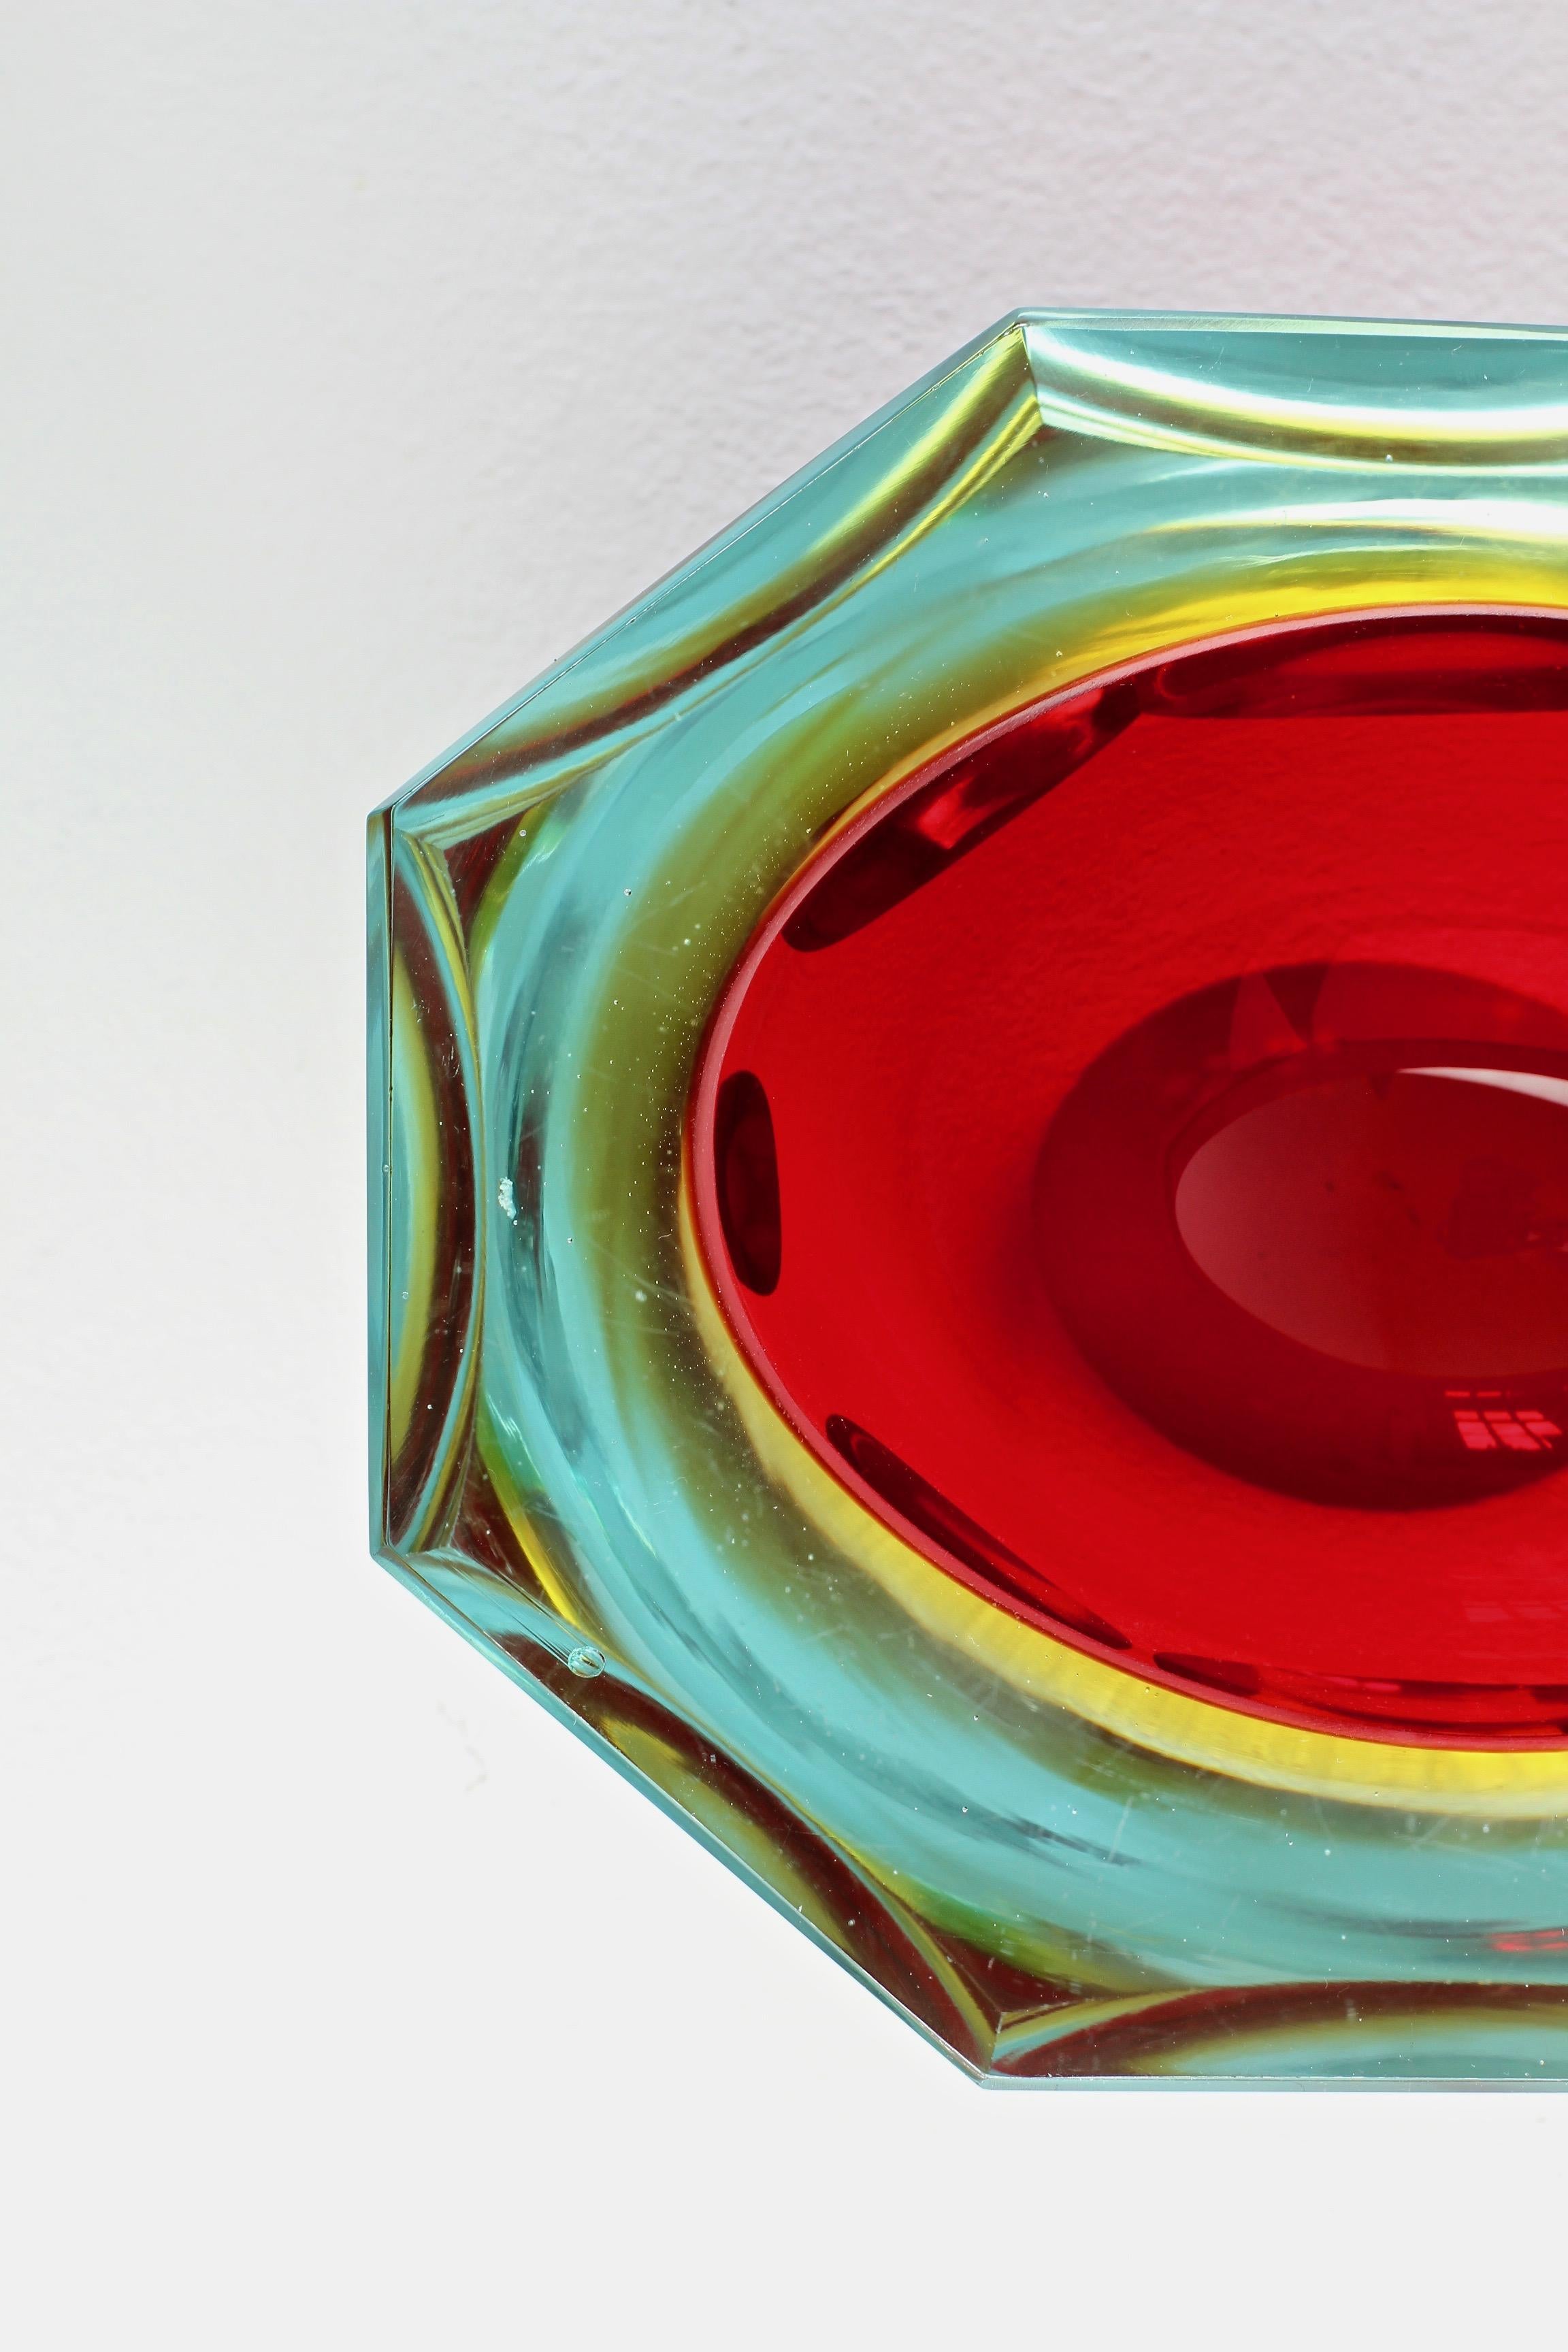 Faceted Red Murano Sommerso Diamond Cut Glass Bowl Attributed to Mandruzzato  For Sale 9